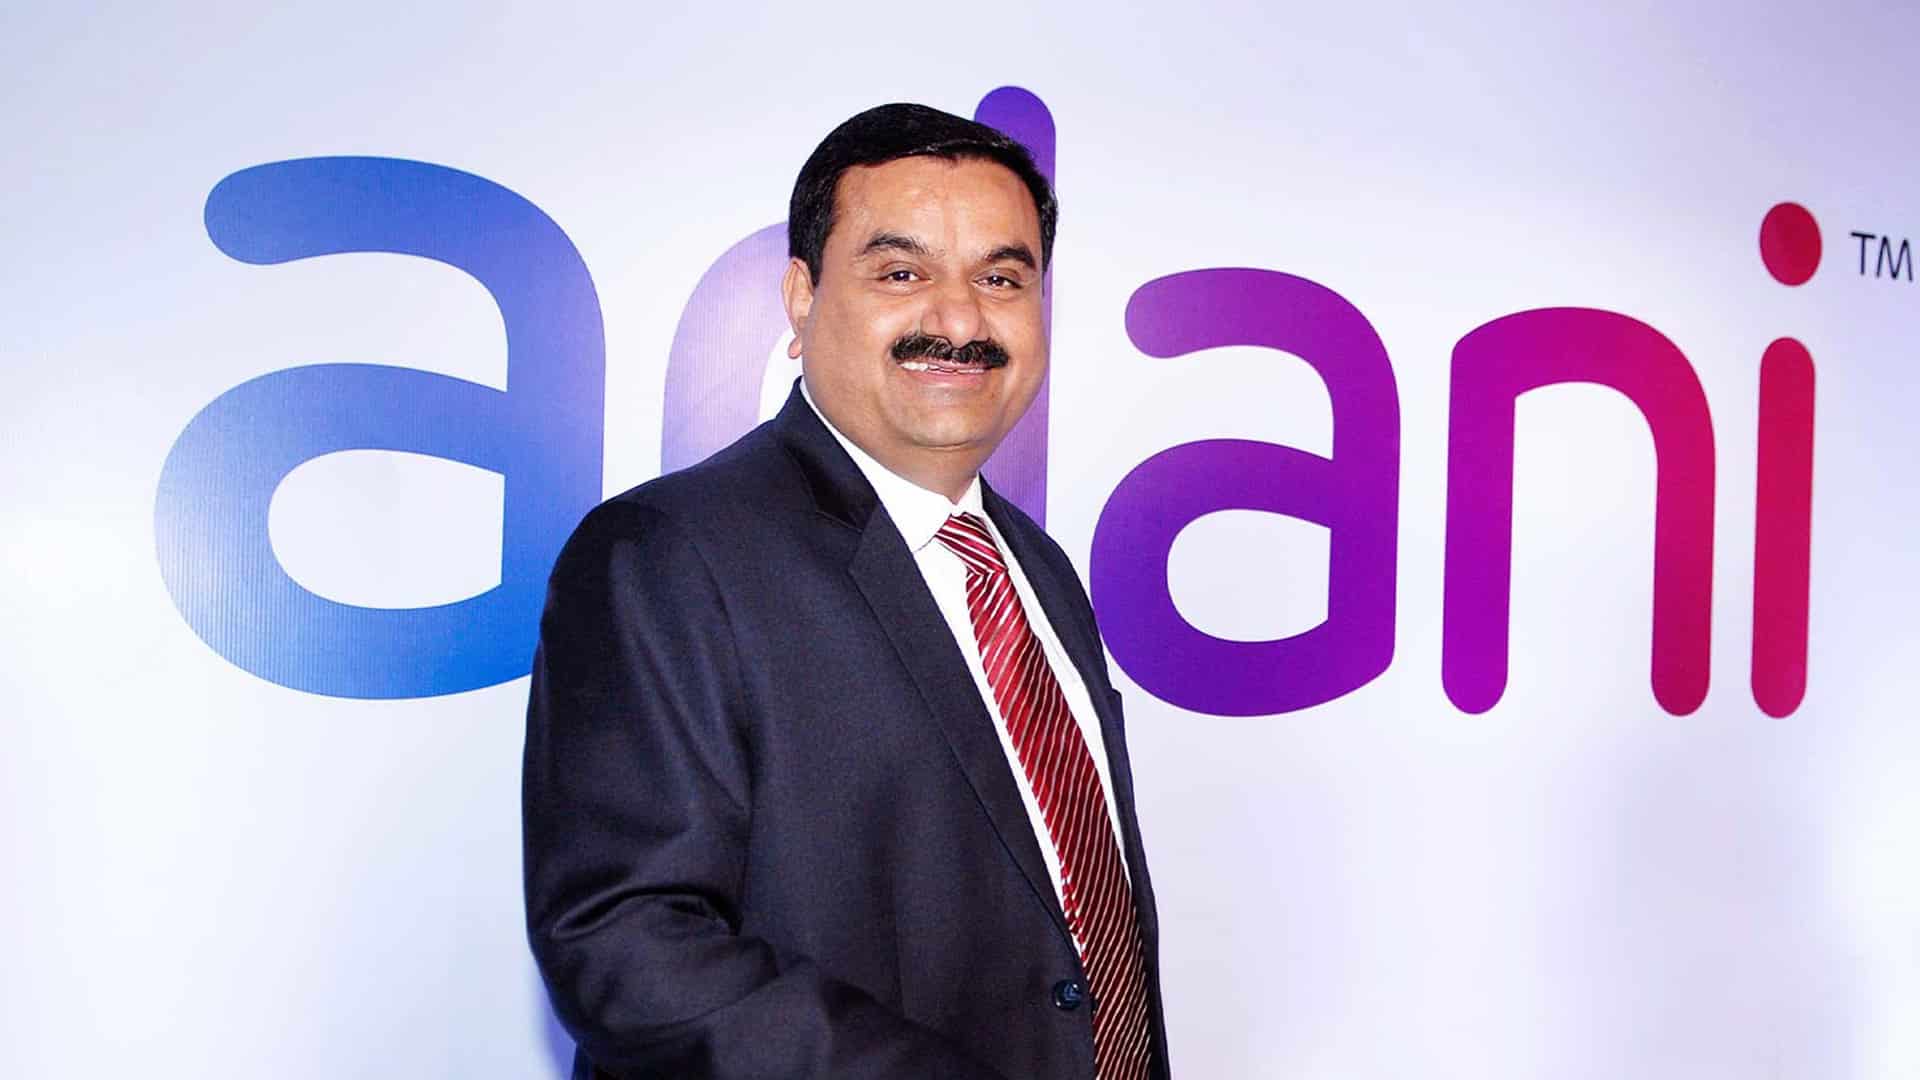 Adani offers to acquire 26% of Ambuja Cements and ACC from open market